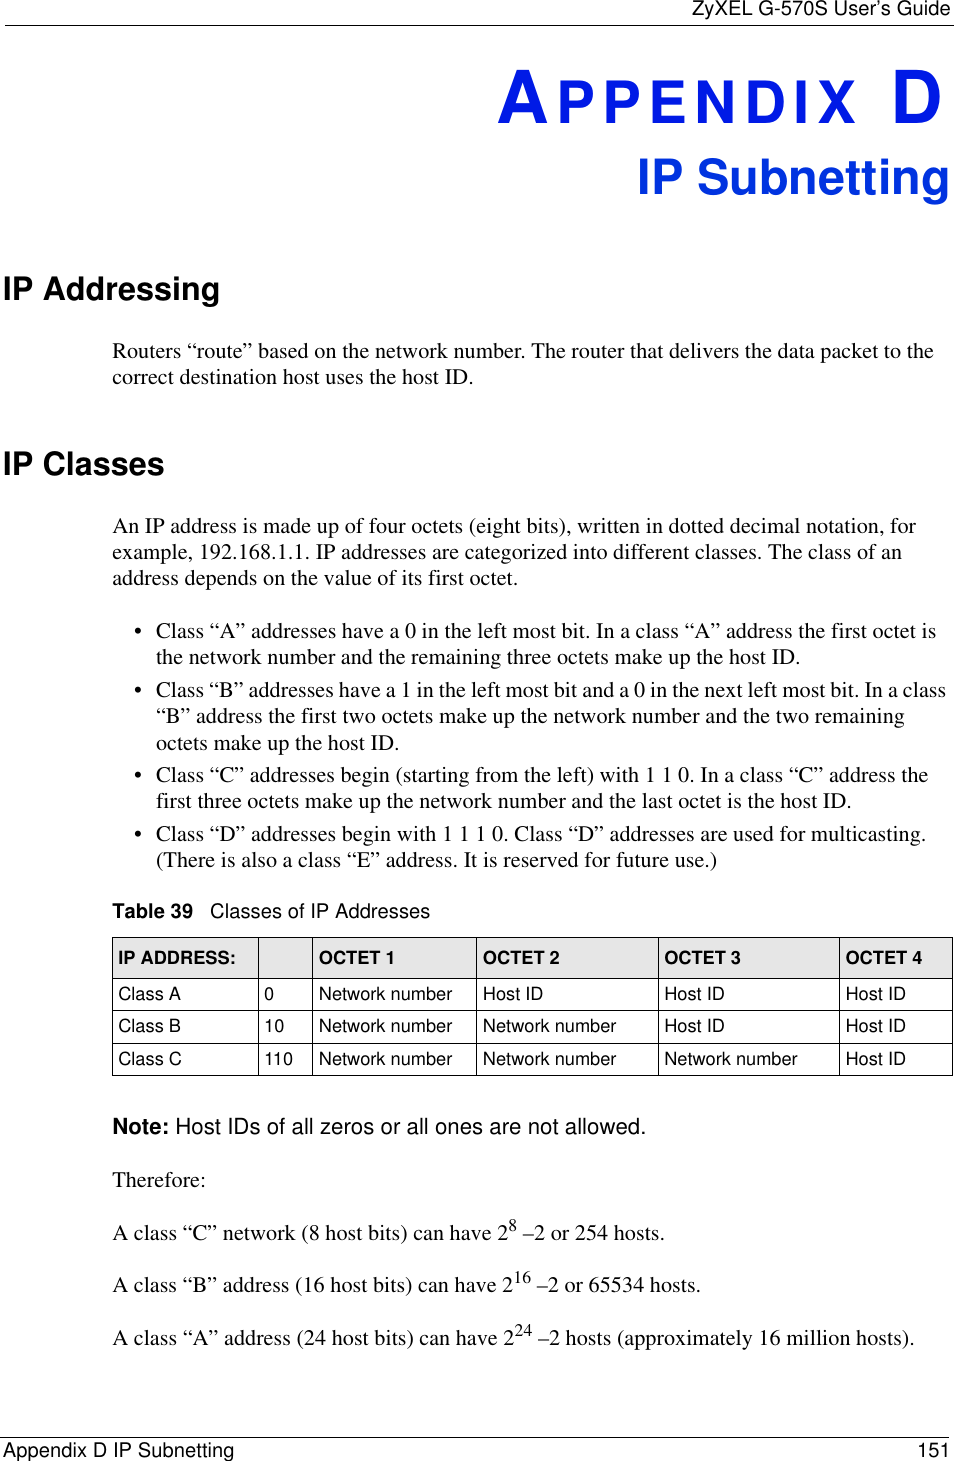 ZyXEL G-570S User’s GuideAppendix D IP Subnetting 151APPENDIX DIP SubnettingIP Addressing Routers “route” based on the network number. The router that delivers the data packet to the correct destination host uses the host ID. IP ClassesAn IP address is made up of four octets (eight bits), written in dotted decimal notation, for example, 192.168.1.1. IP addresses are categorized into different classes. The class of an address depends on the value of its first octet. • Class “A” addresses have a 0 in the left most bit. In a class “A” address the first octet is the network number and the remaining three octets make up the host ID.• Class “B” addresses have a 1 in the left most bit and a 0 in the next left most bit. In a class “B” address the first two octets make up the network number and the two remaining octets make up the host ID.• Class “C” addresses begin (starting from the left) with 1 1 0. In a class “C” address the first three octets make up the network number and the last octet is the host ID.• Class “D” addresses begin with 1 1 1 0. Class “D” addresses are used for multicasting. (There is also a class “E” address. It is reserved for future use.) Note: Host IDs of all zeros or all ones are not allowed.Therefore:A class “C” network (8 host bits) can have 28 –2 or 254 hosts. A class “B” address (16 host bits) can have 216 –2 or 65534 hosts. A class “A” address (24 host bits) can have 224 –2 hosts (approximately 16 million hosts). Table 39   Classes of IP AddressesIP ADDRESS: OCTET 1 OCTET 2 OCTET 3 OCTET 4Class A 0Network number Host ID Host ID Host IDClass B 10 Network number Network number Host ID Host IDClass C 110 Network number Network number Network number Host ID